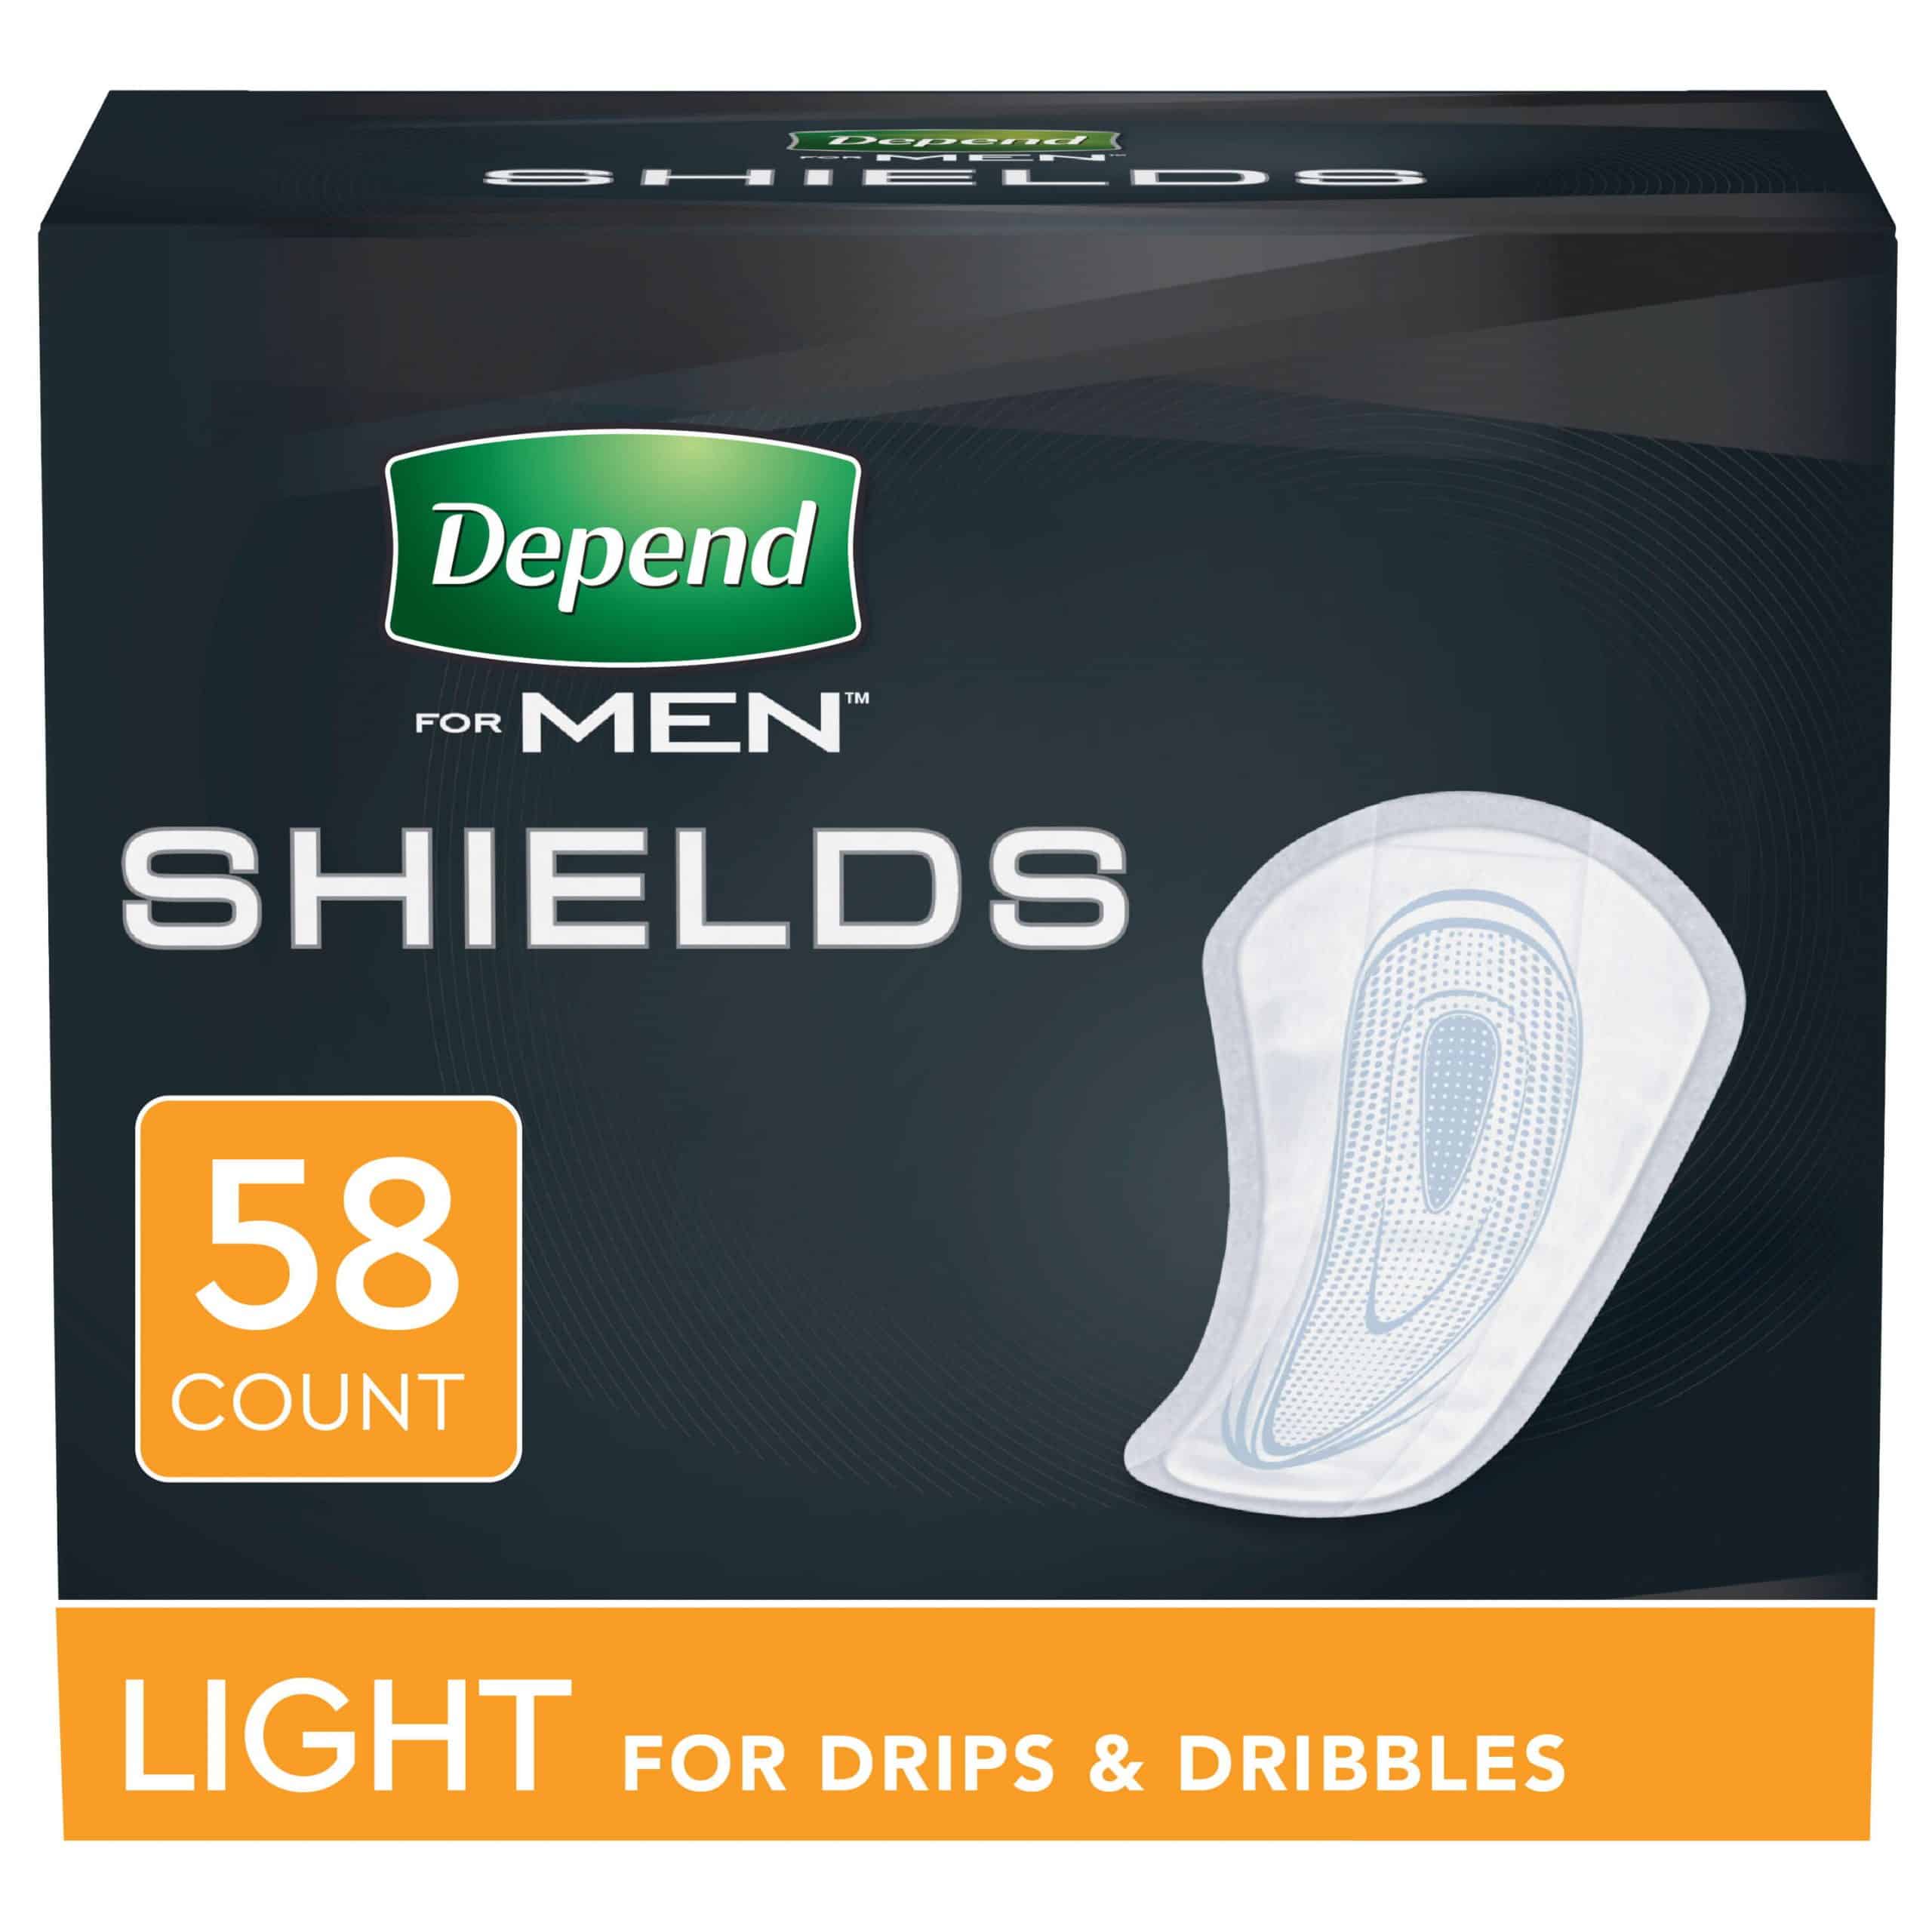 Depend Incontinence Shields, Pads for Men, Light Absorbency, 58 Count ...